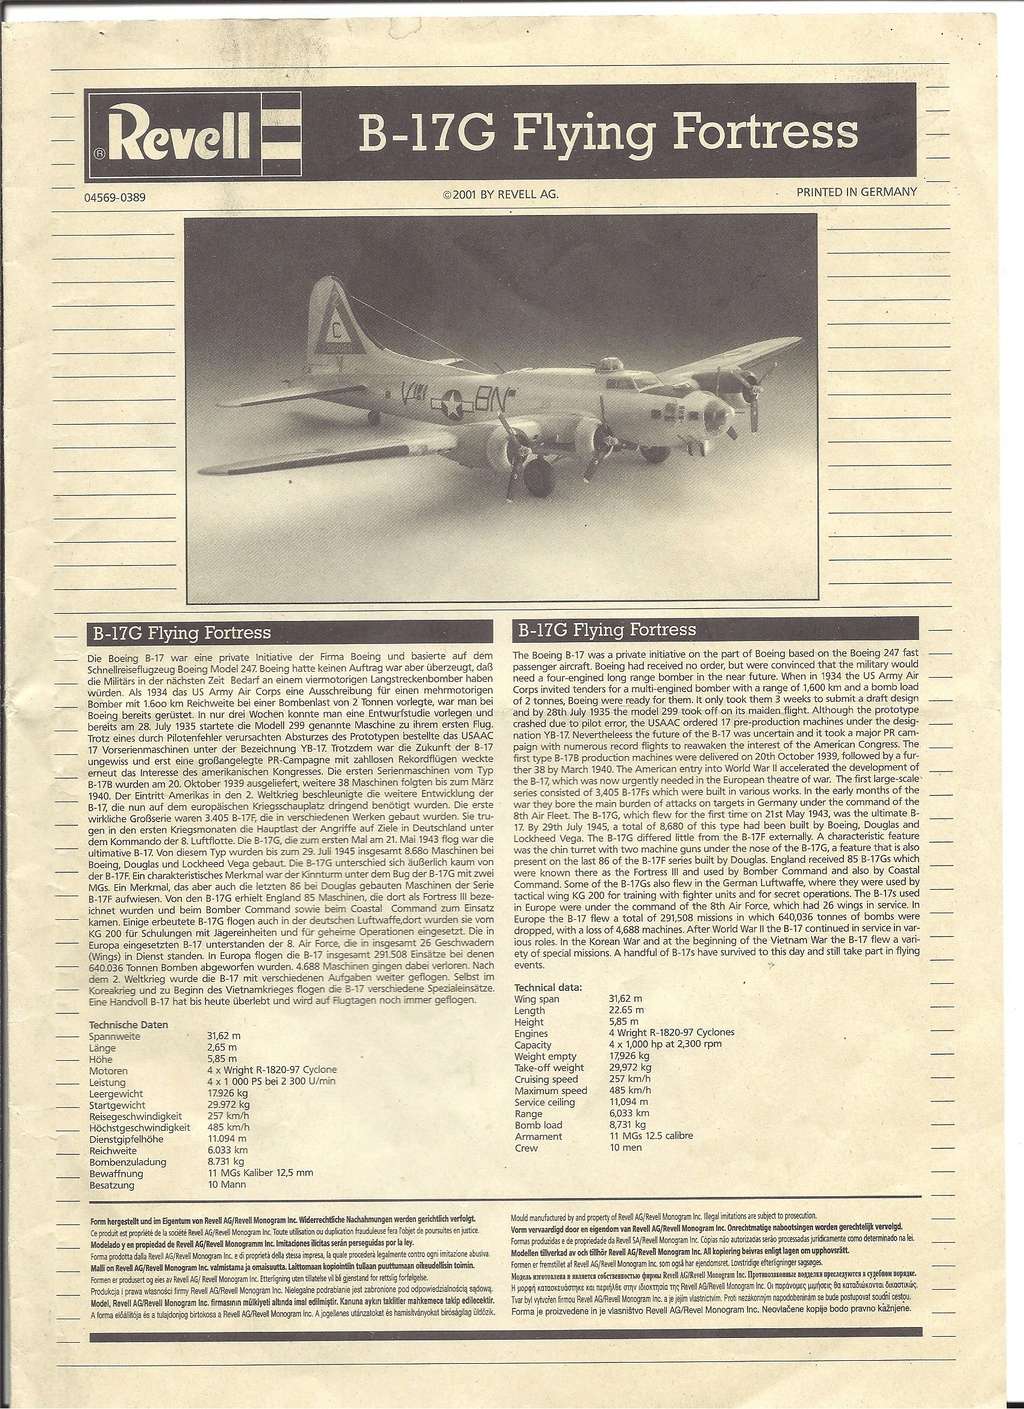 [REVELL] BOEING B 17 G FYING FORTRESS 1/48ème Réf 04569 Notice Revel122